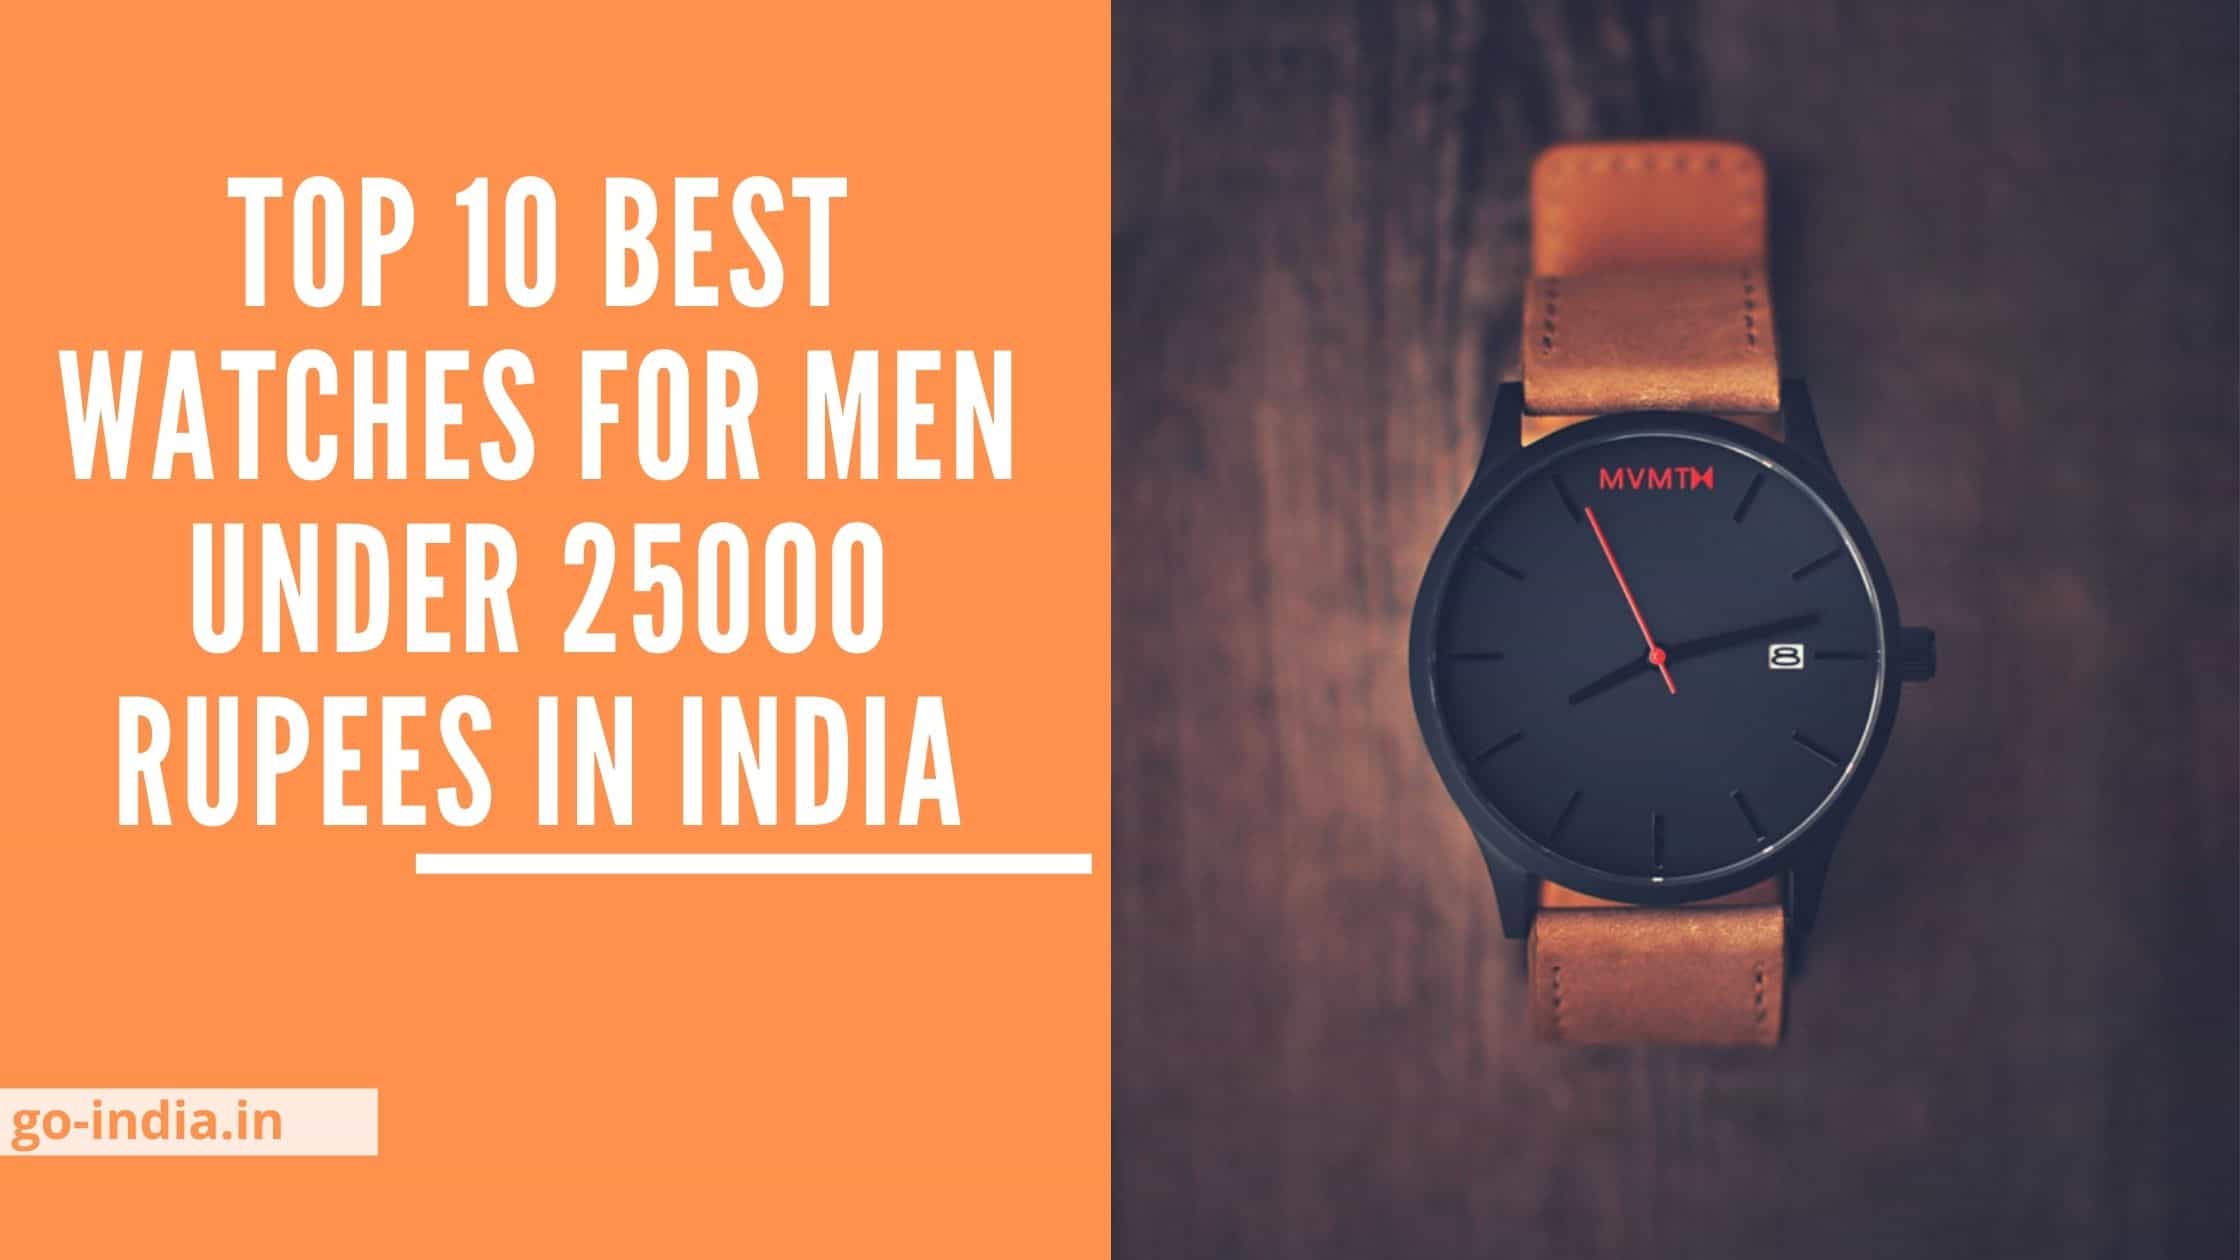 Top 10 Best Watches For Men Under 25000 Rupees in India 2022